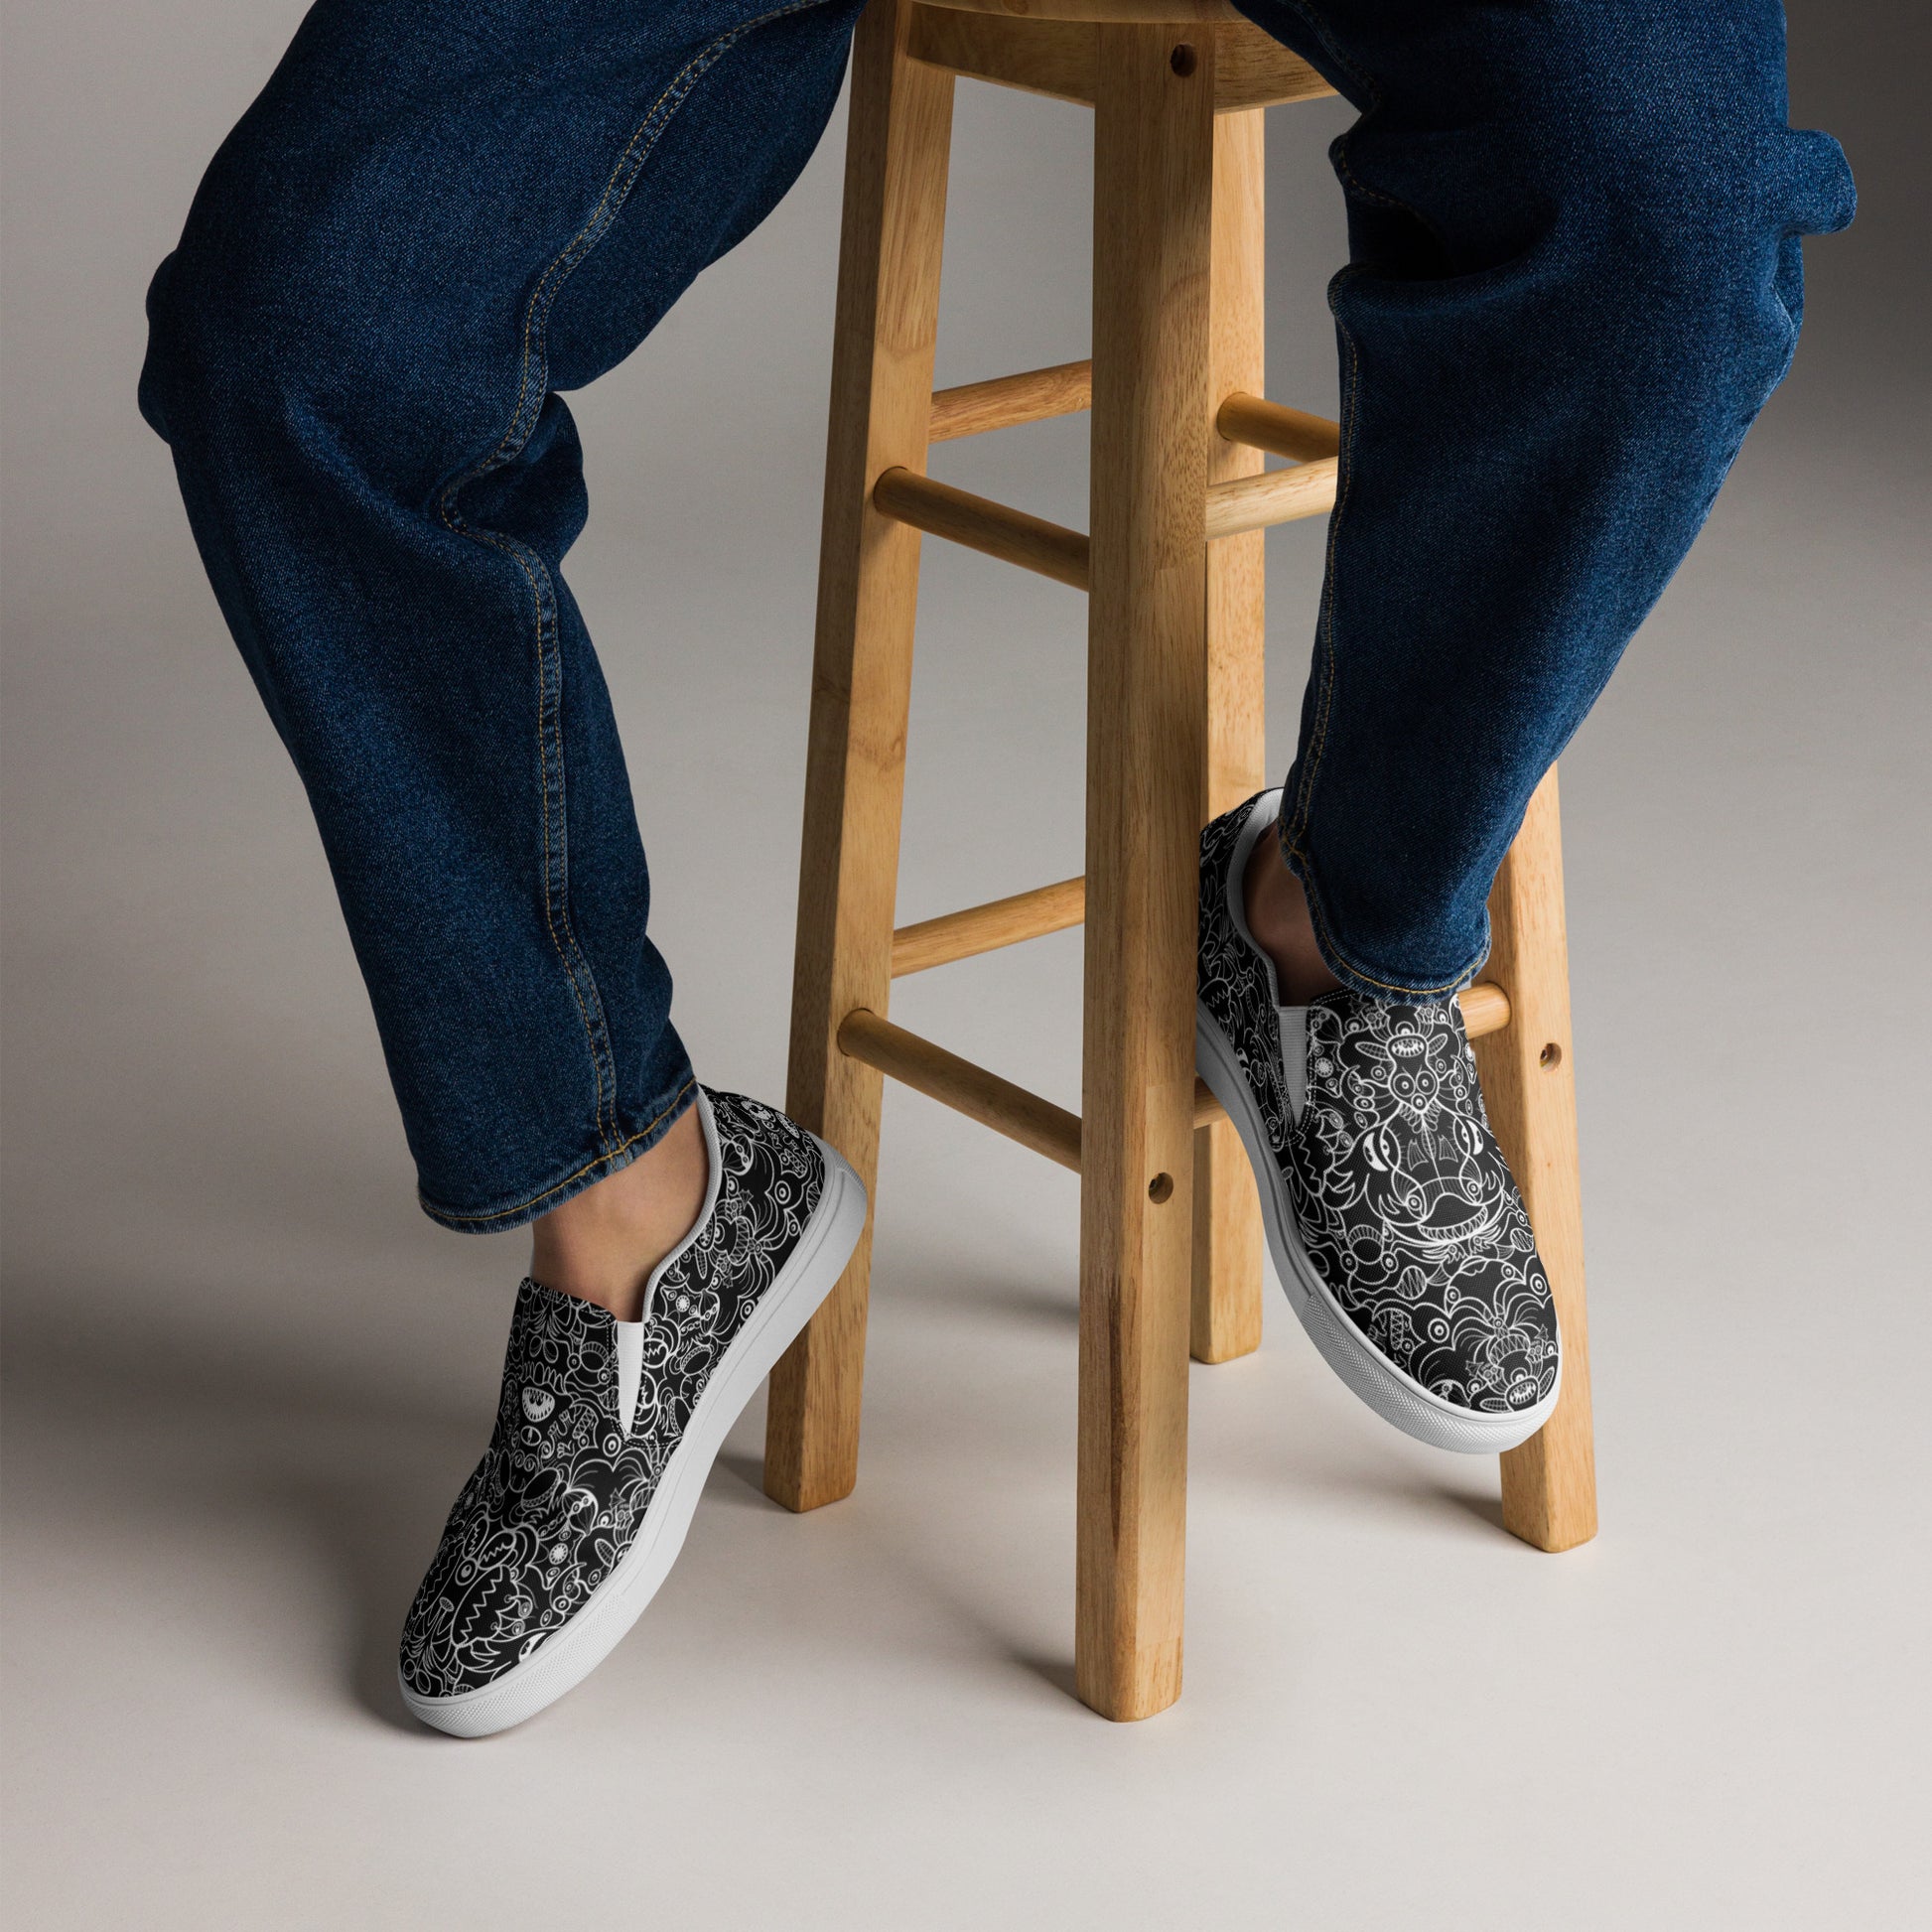 The powerful dark side of the Doodle world Men’s slip-on canvas shoes. Lifestyle